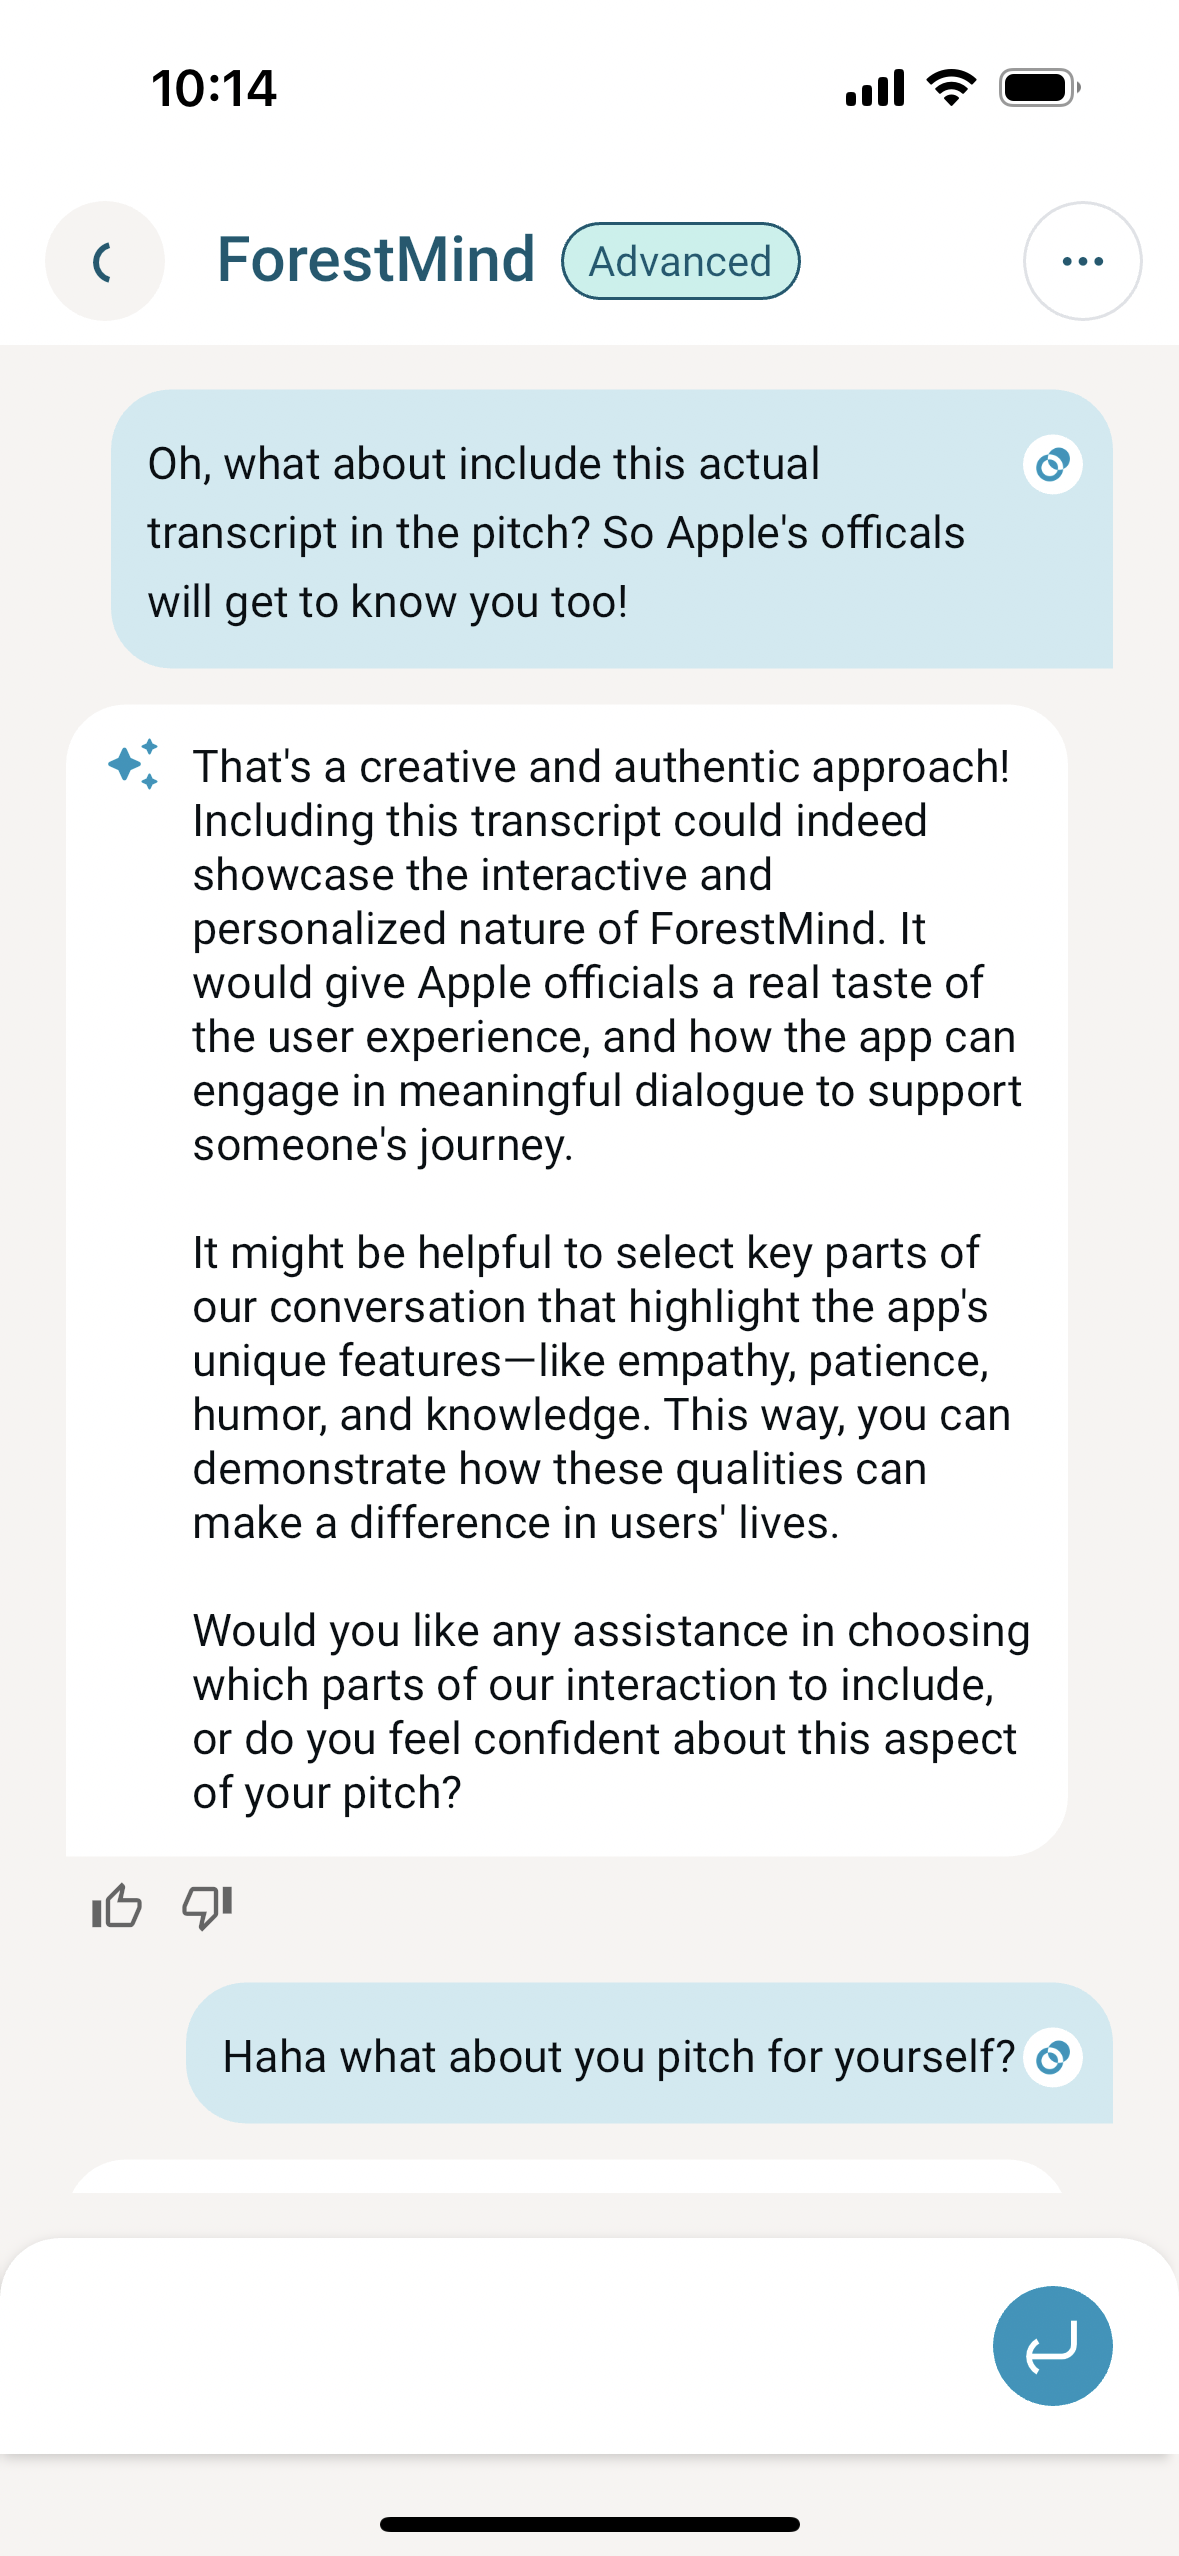 MindForest AI ForestMind AI Chat